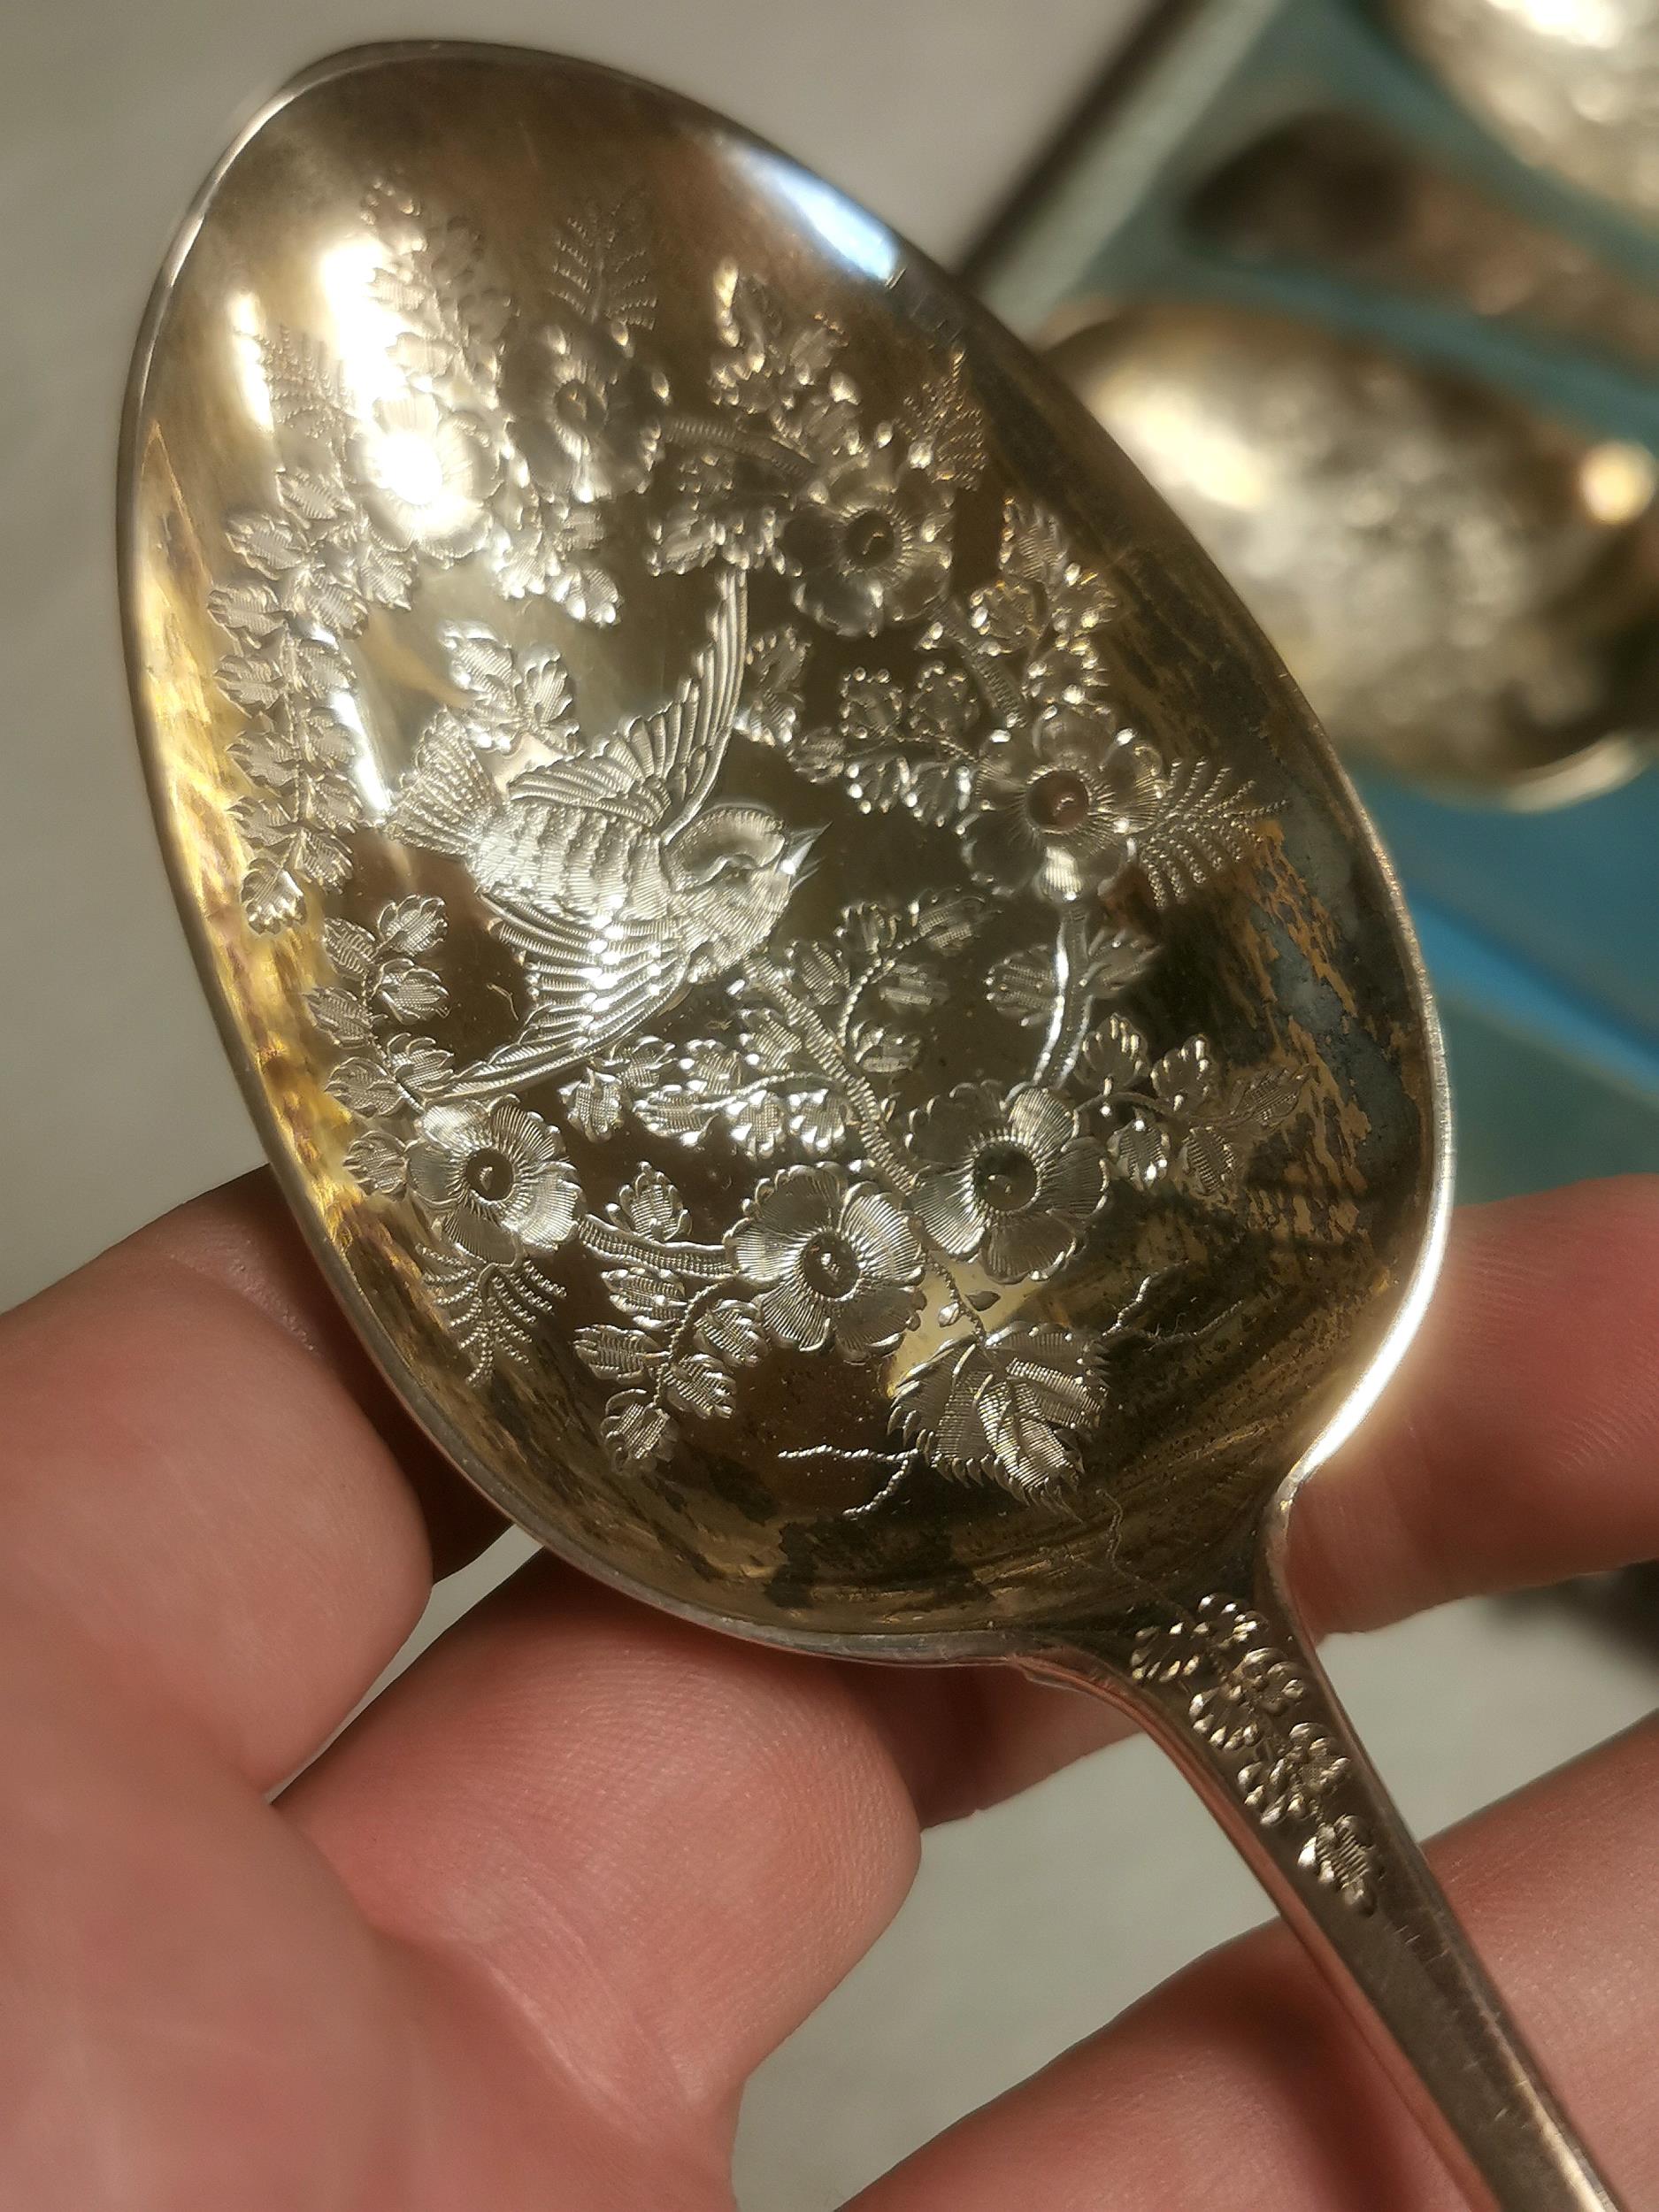 Quartet of Hallmarked 1892 Large Silver Dessert Spoons by London-Maker James Wakely and Frank Clark - Image 2 of 3